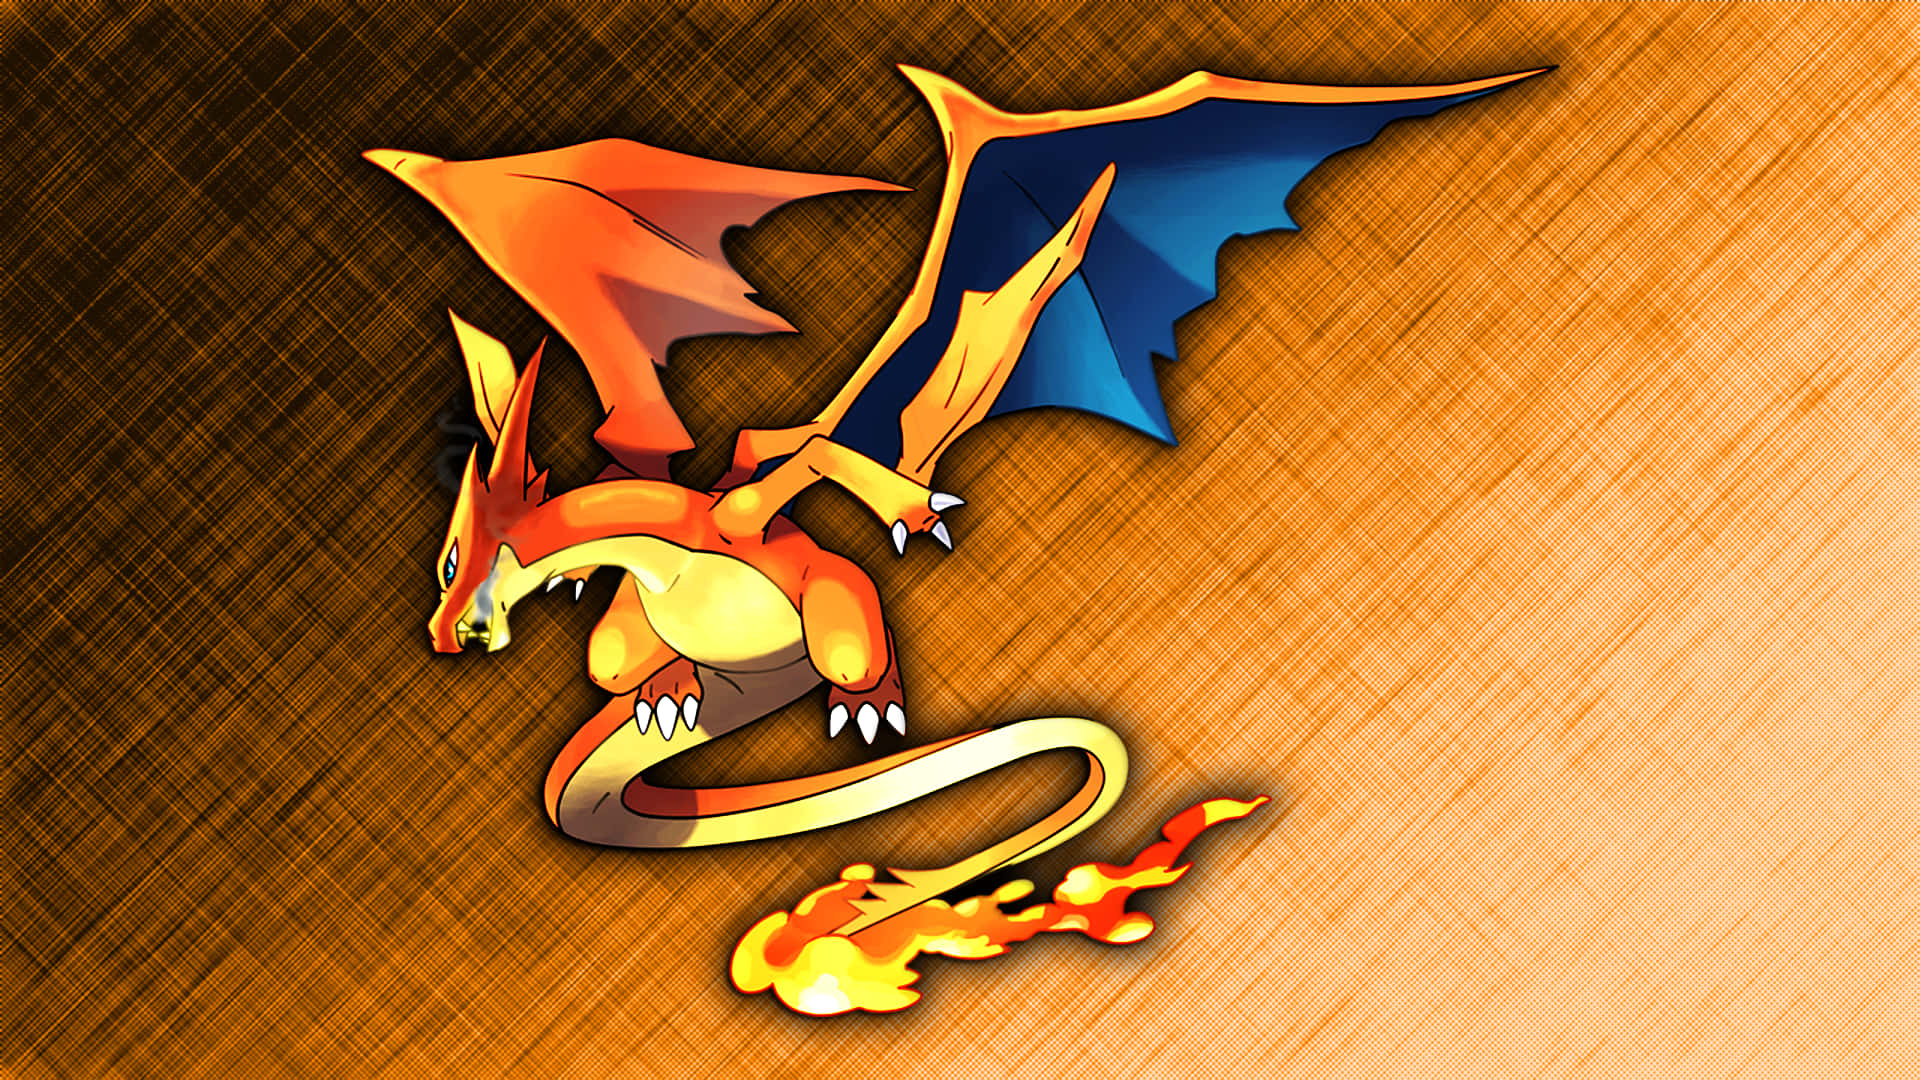 “Lightning Strikes Twice - Epic Charizard Captured in a High-Definition Wallpaper” Wallpaper